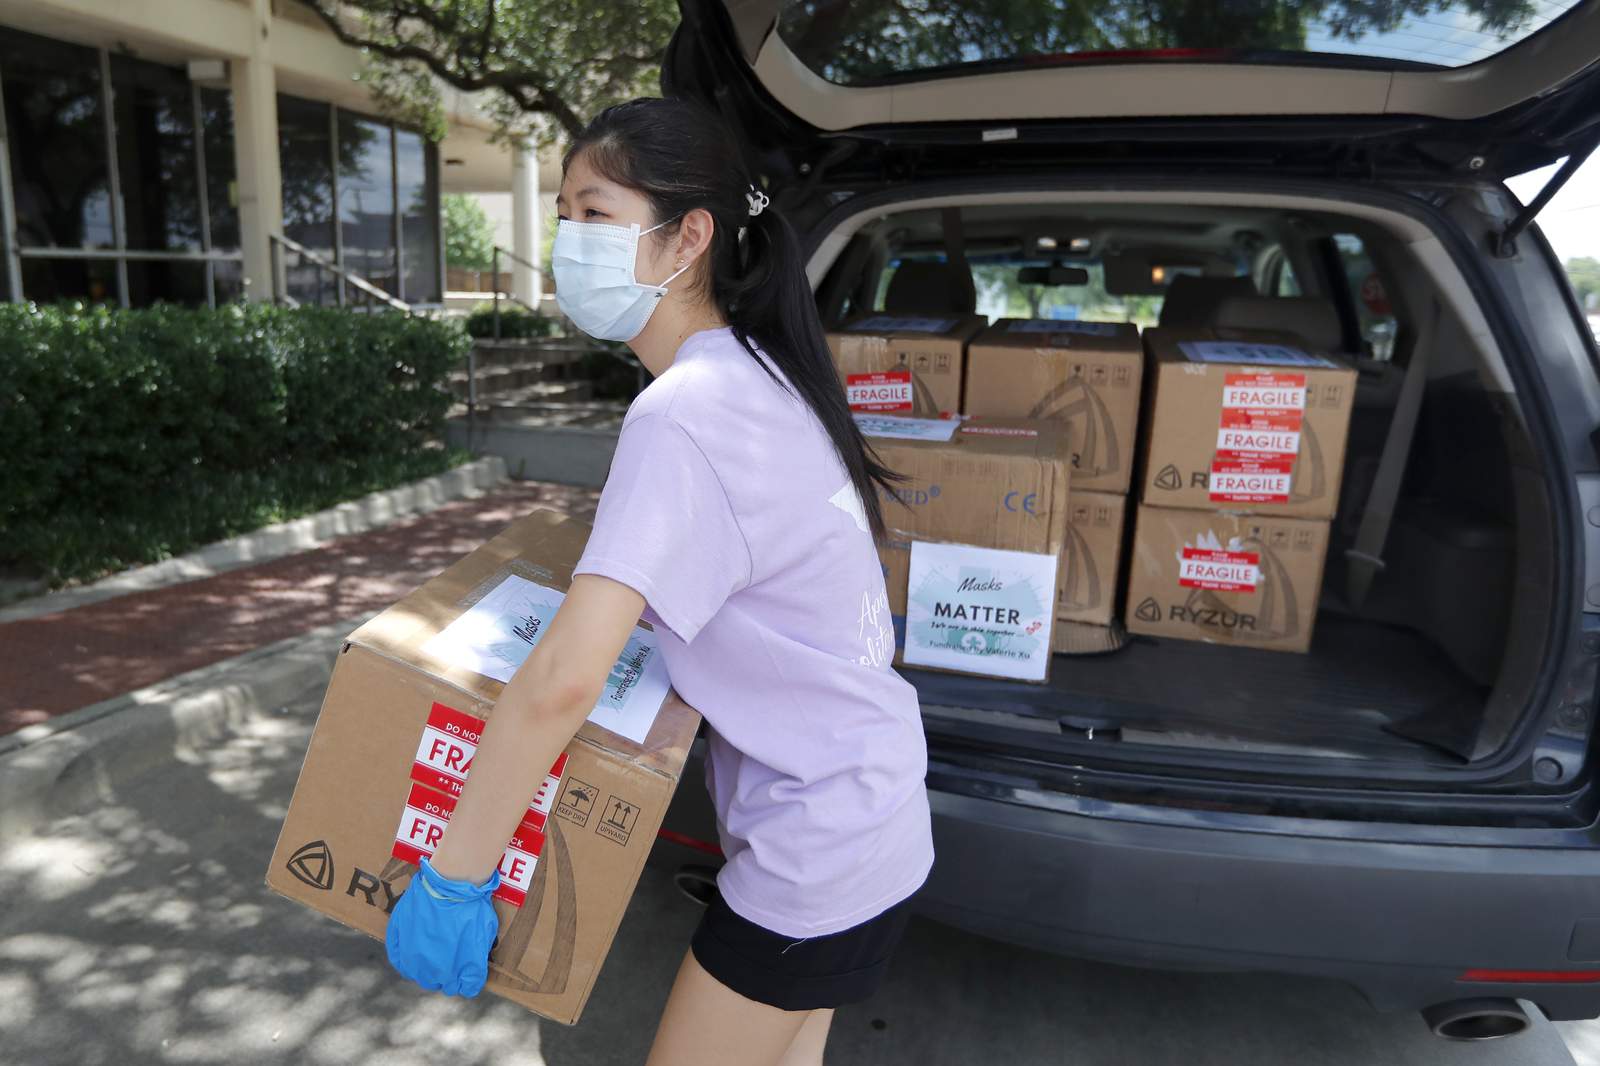 Buying masks, delivering food: Teens step up in pandemic